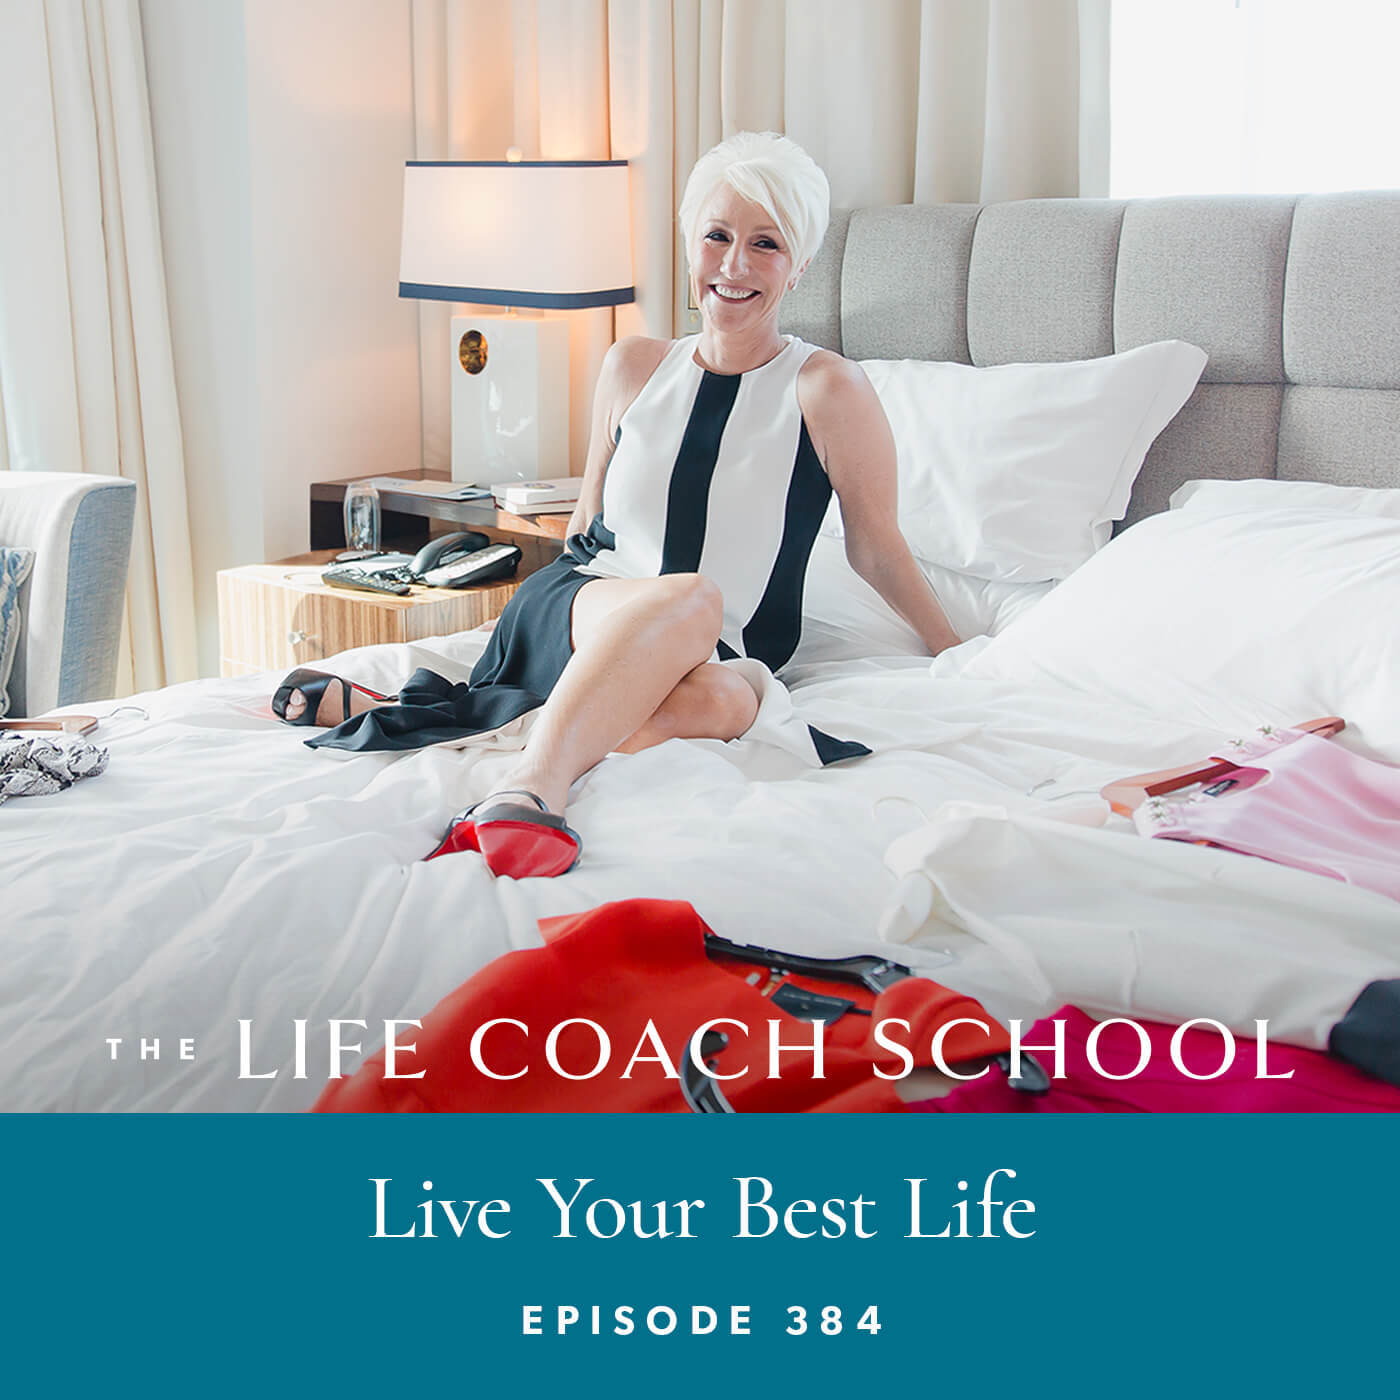 The Life Coach School Podcast with Brooke Castillo | Live Your Best Life